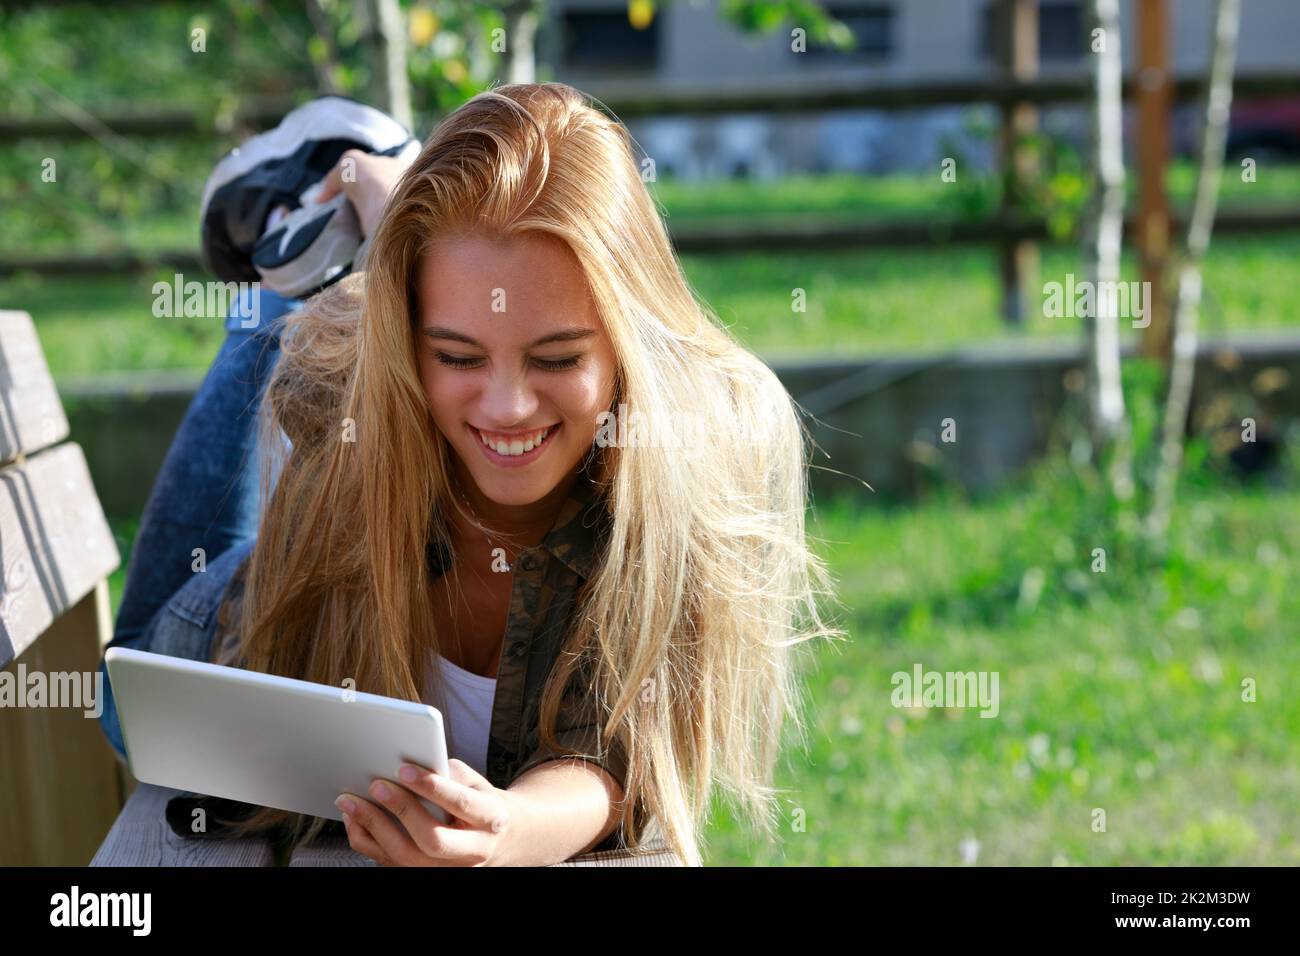 Happy amused young woman with a vivacious smile Stock Photo